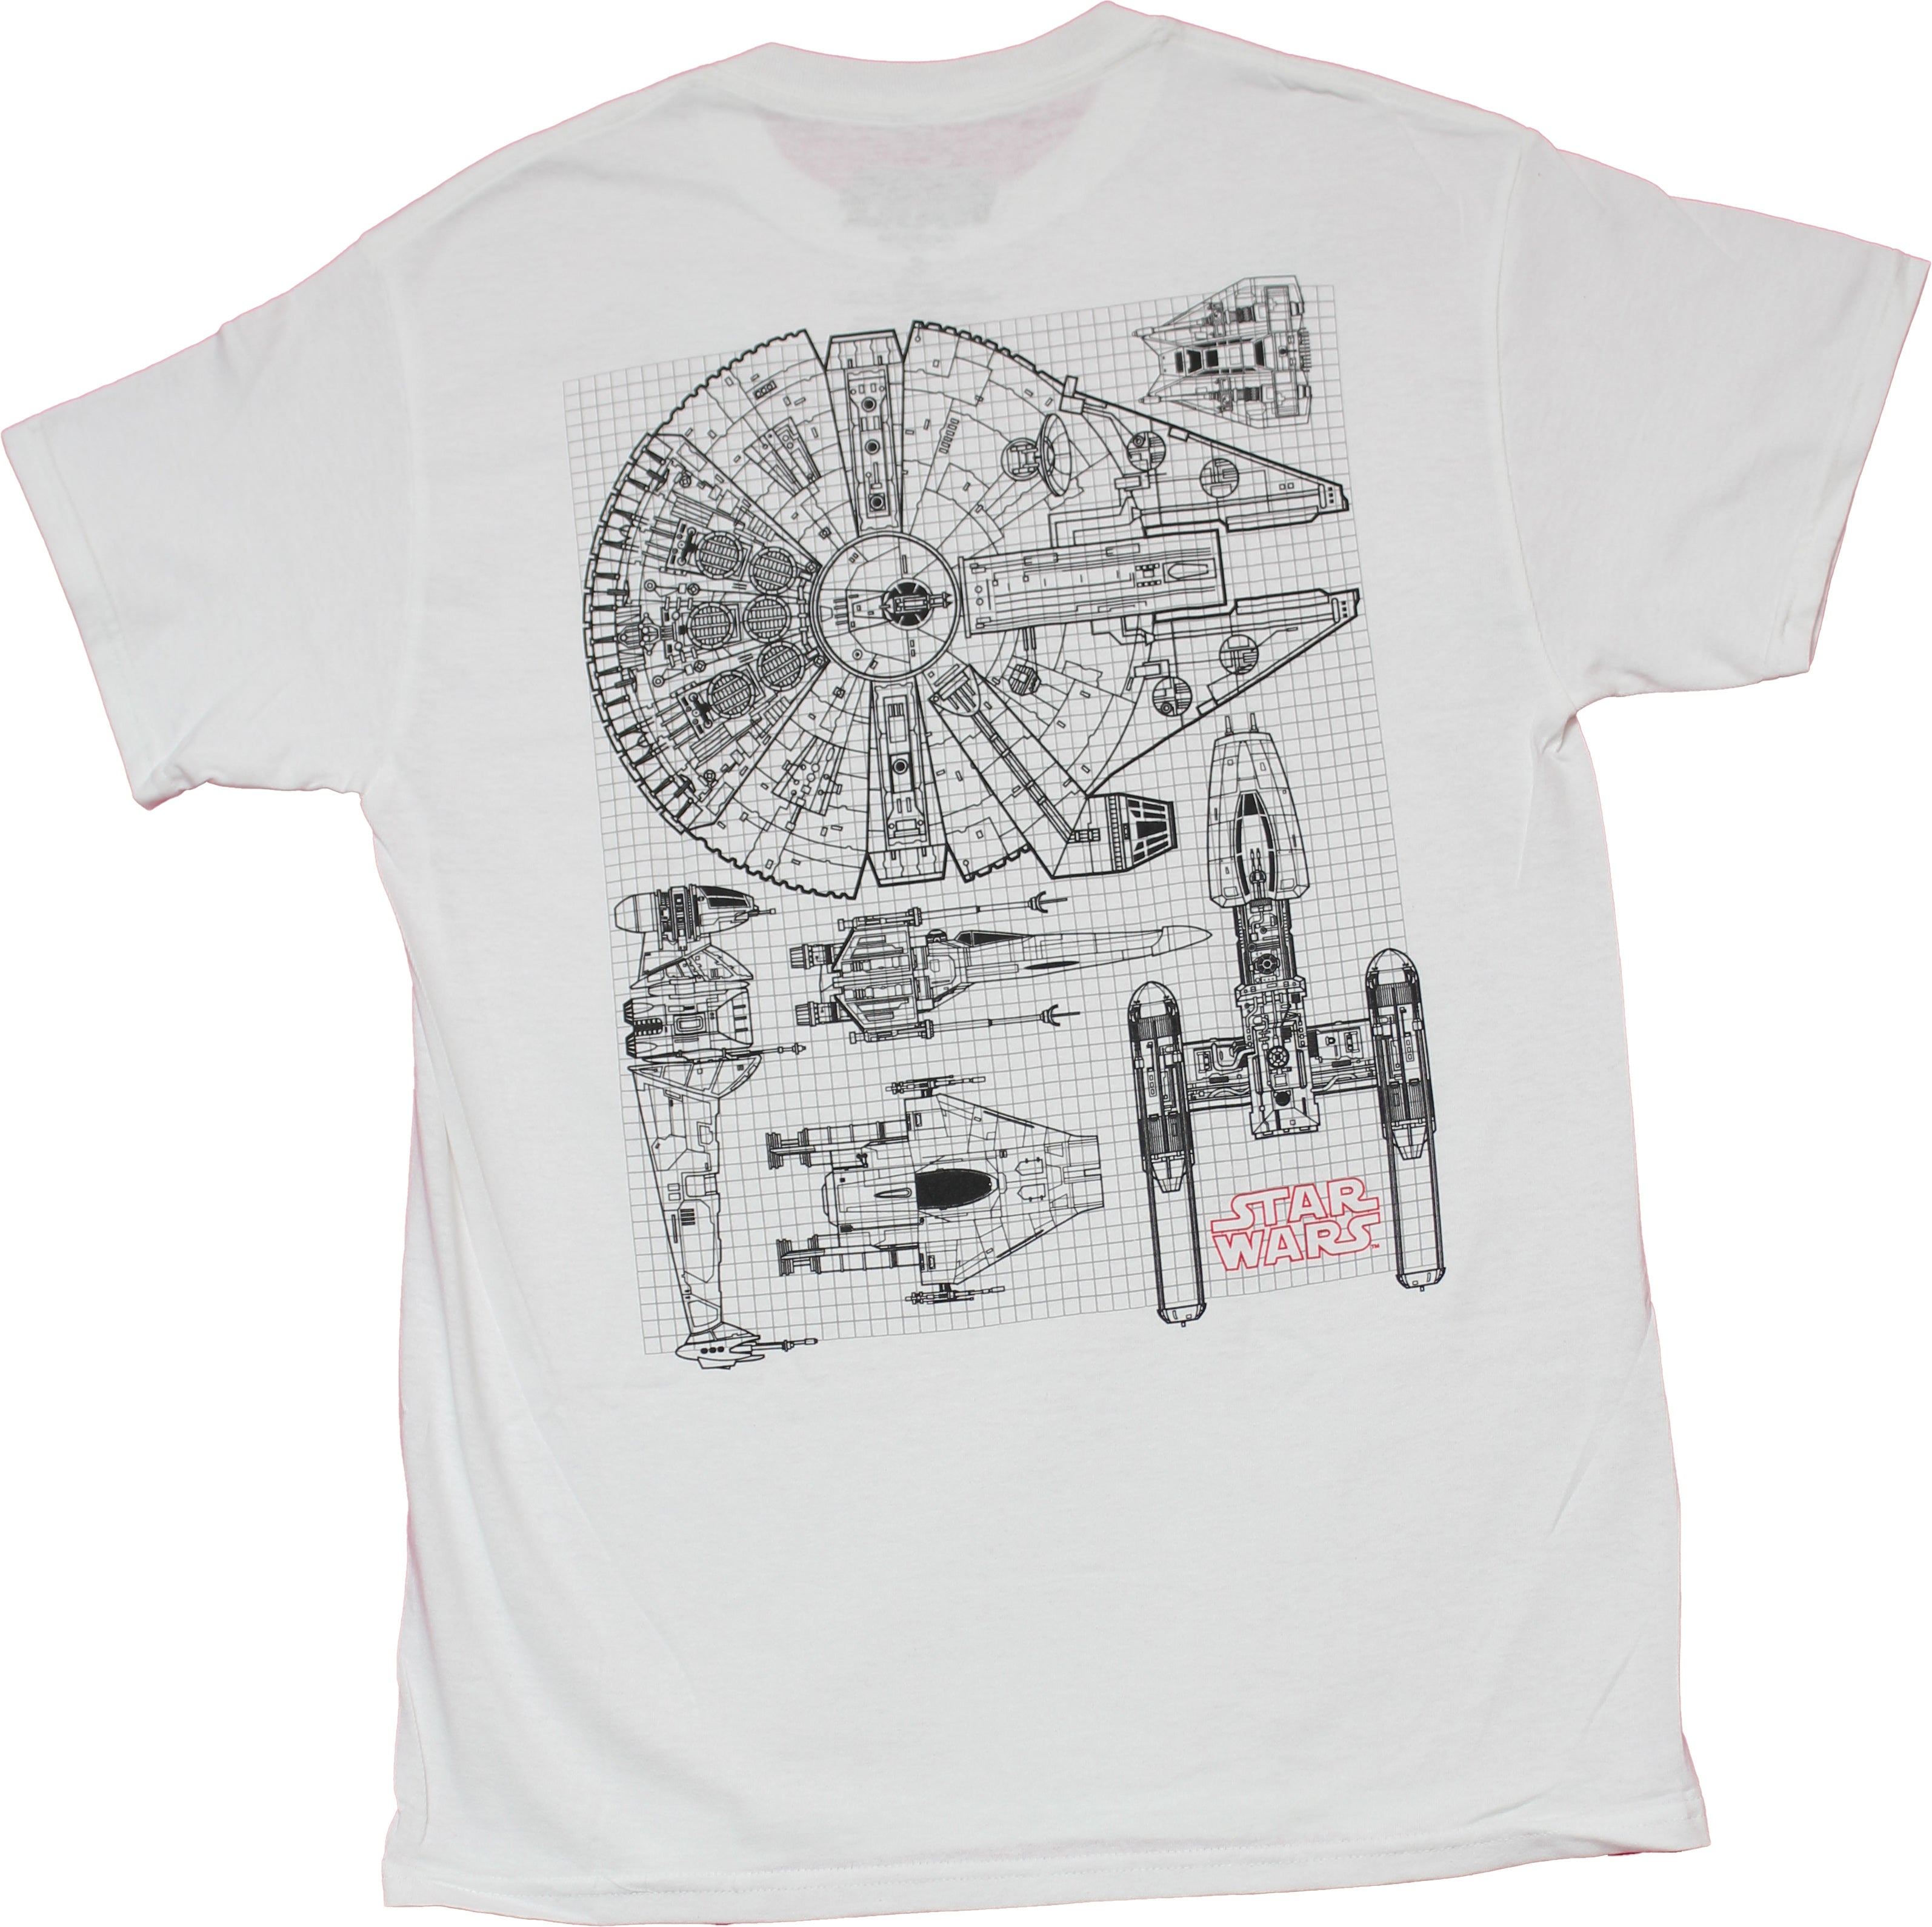 Star Wars Mens T-shirt - Lapel Falcon schematic large version on back